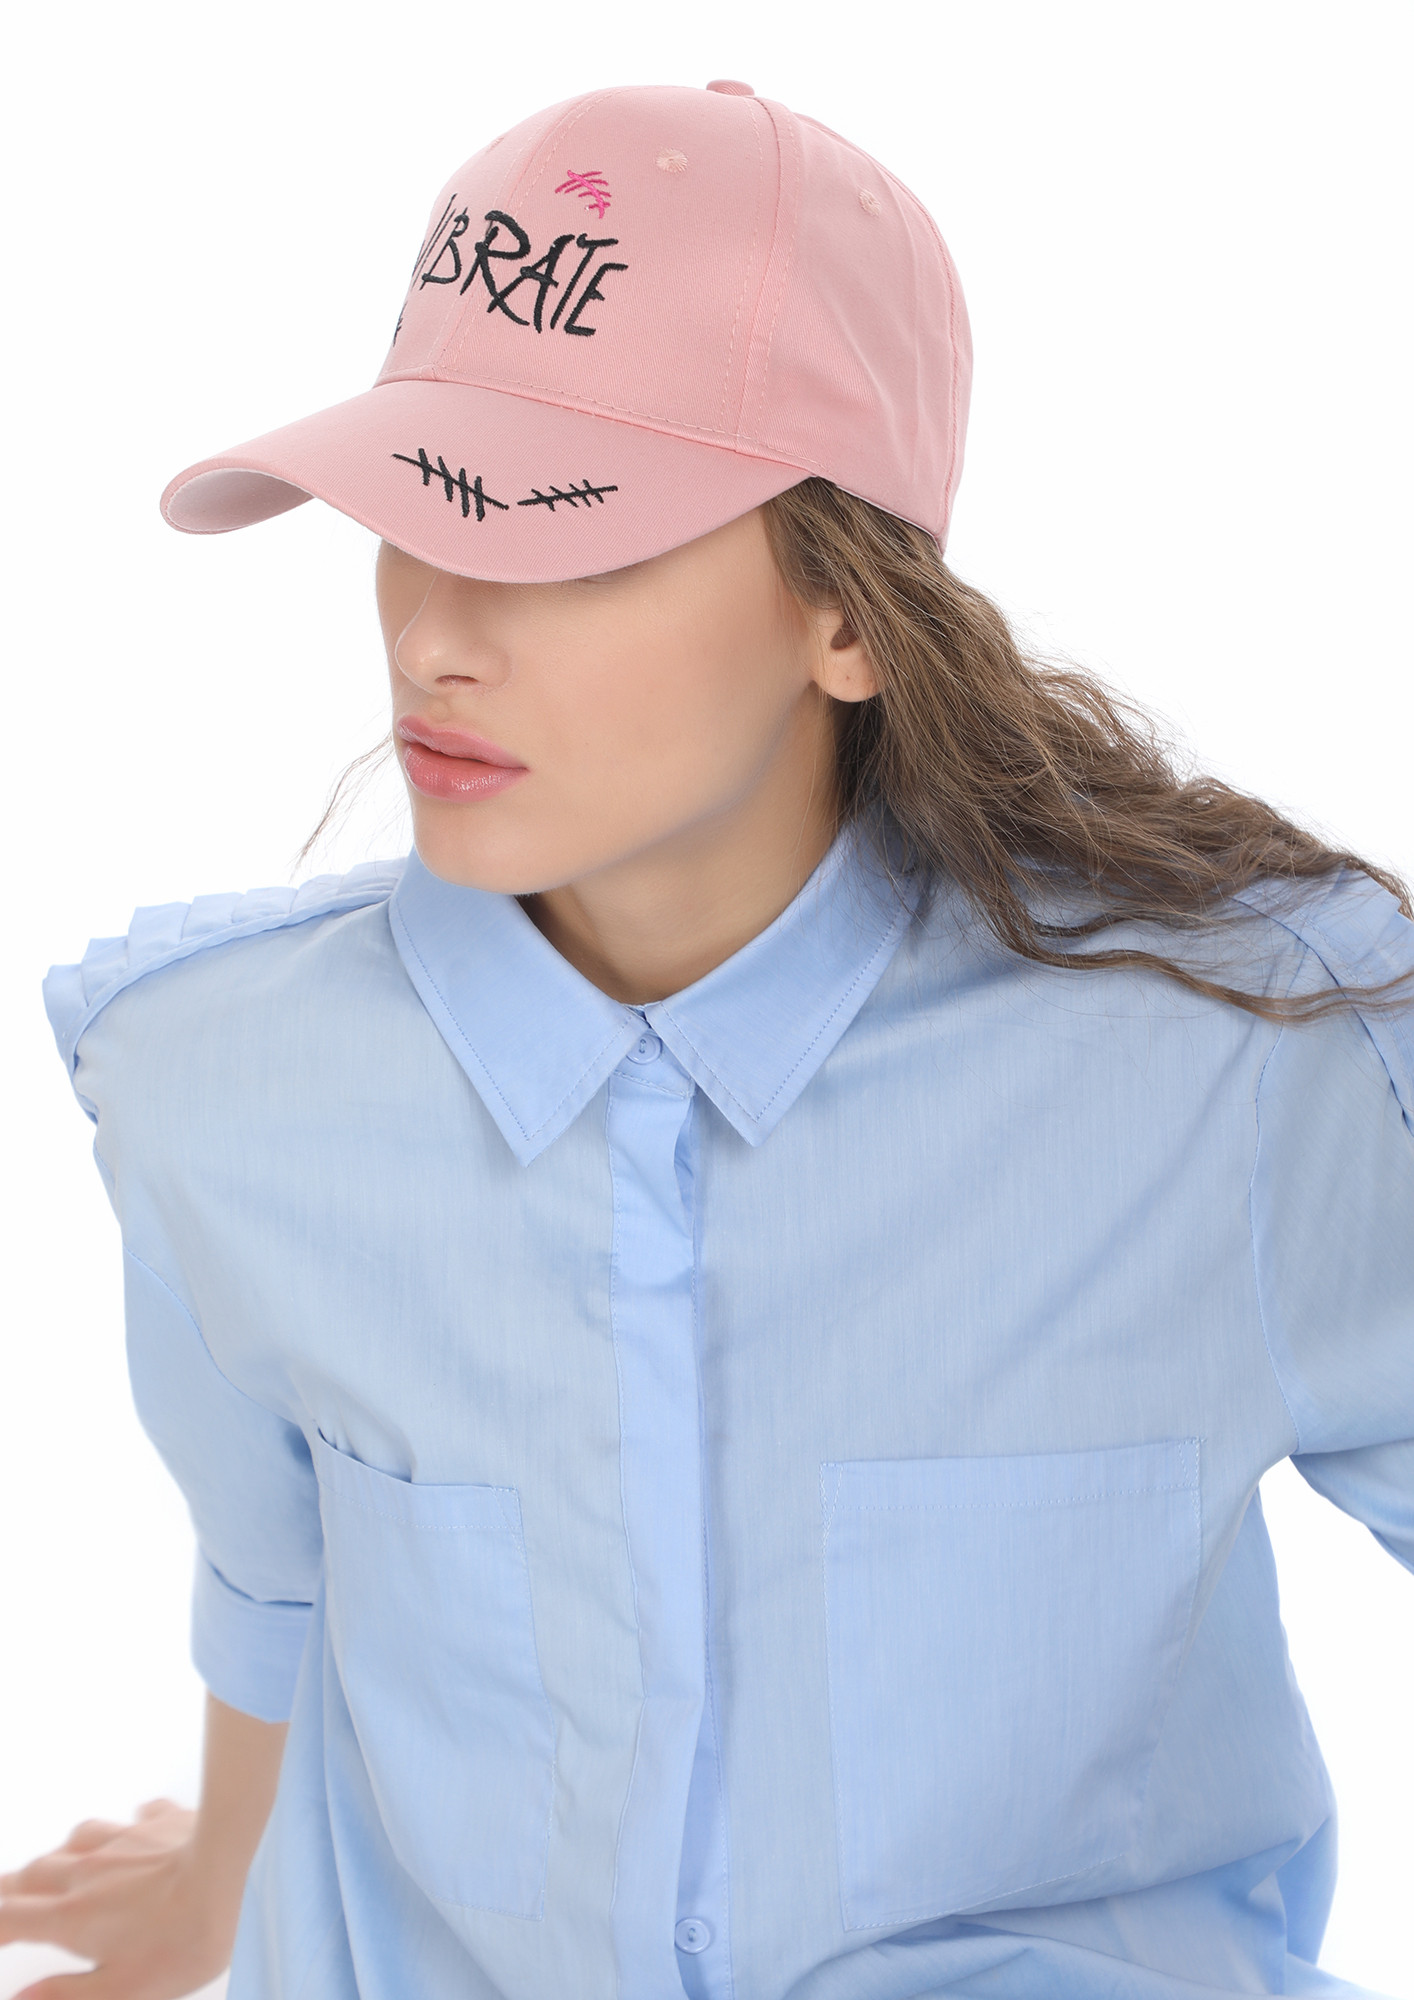 ASK ME OUT BABY PINK CAP